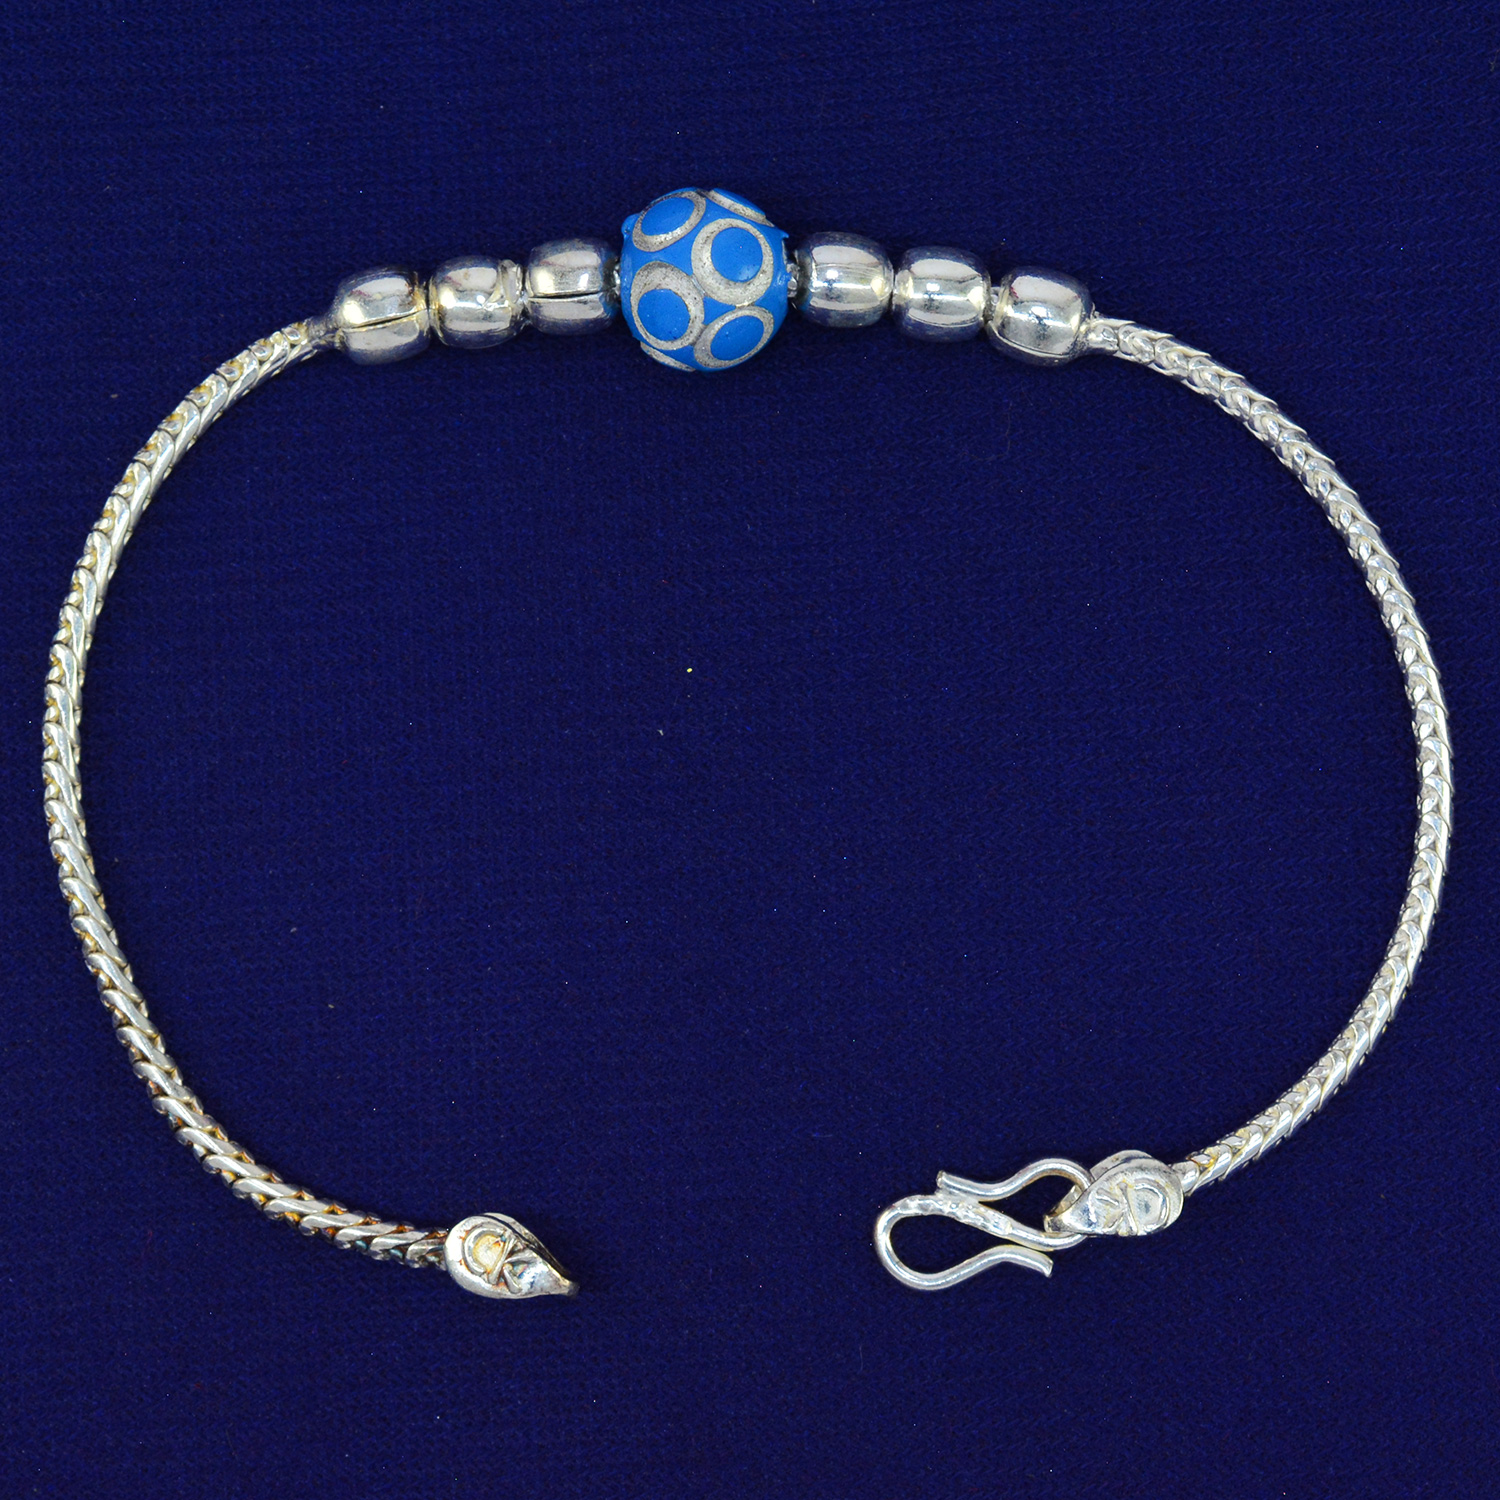 Blue Bead in Mid of 70% of Pure Silver Design Awesome Looking Rakhi - 9.7 Grams